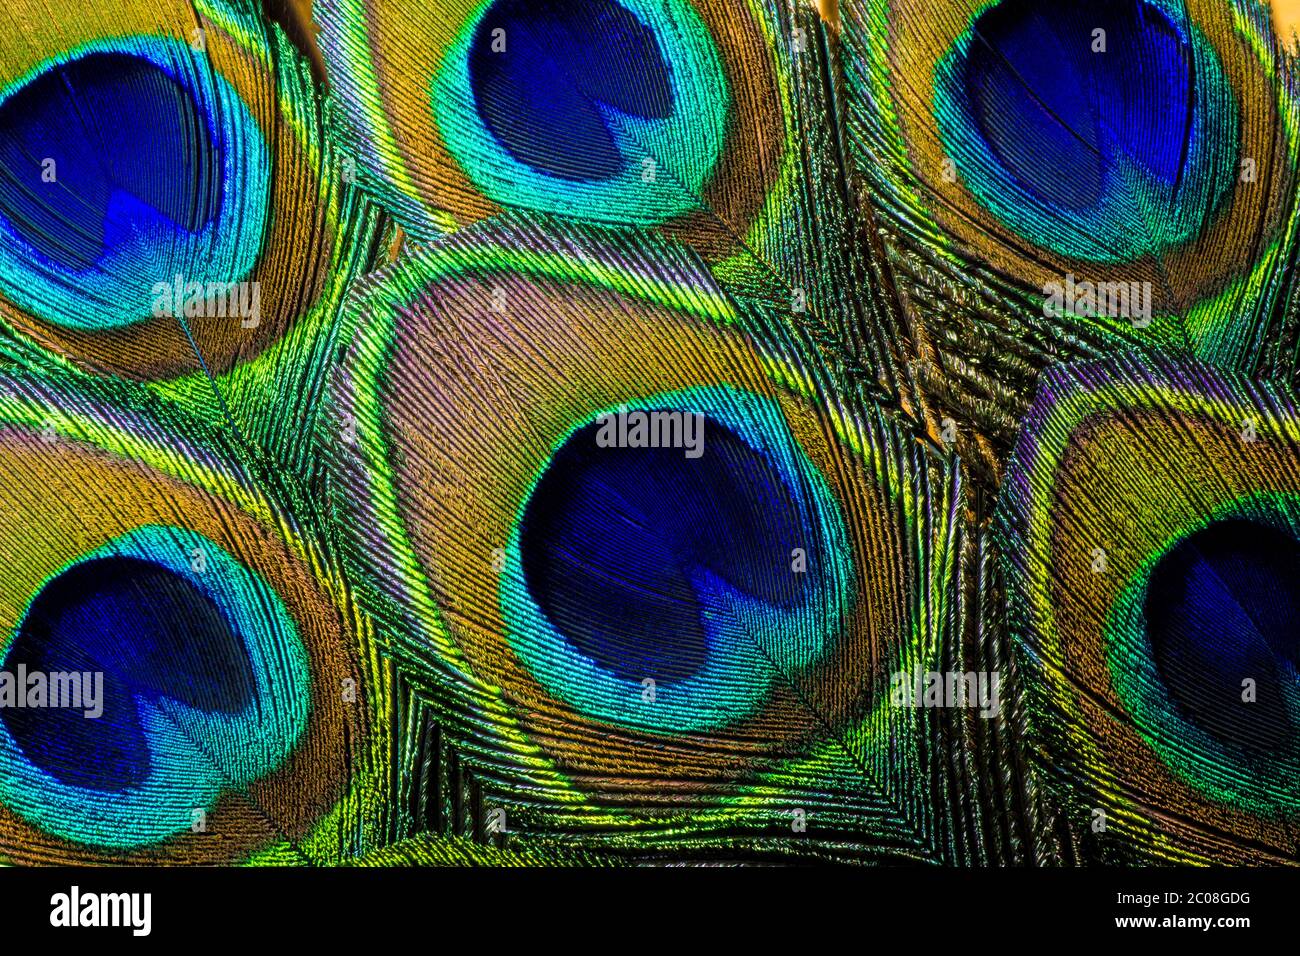 Colorful and Iridescent Peacock Feathers Arrangement Stock Photo